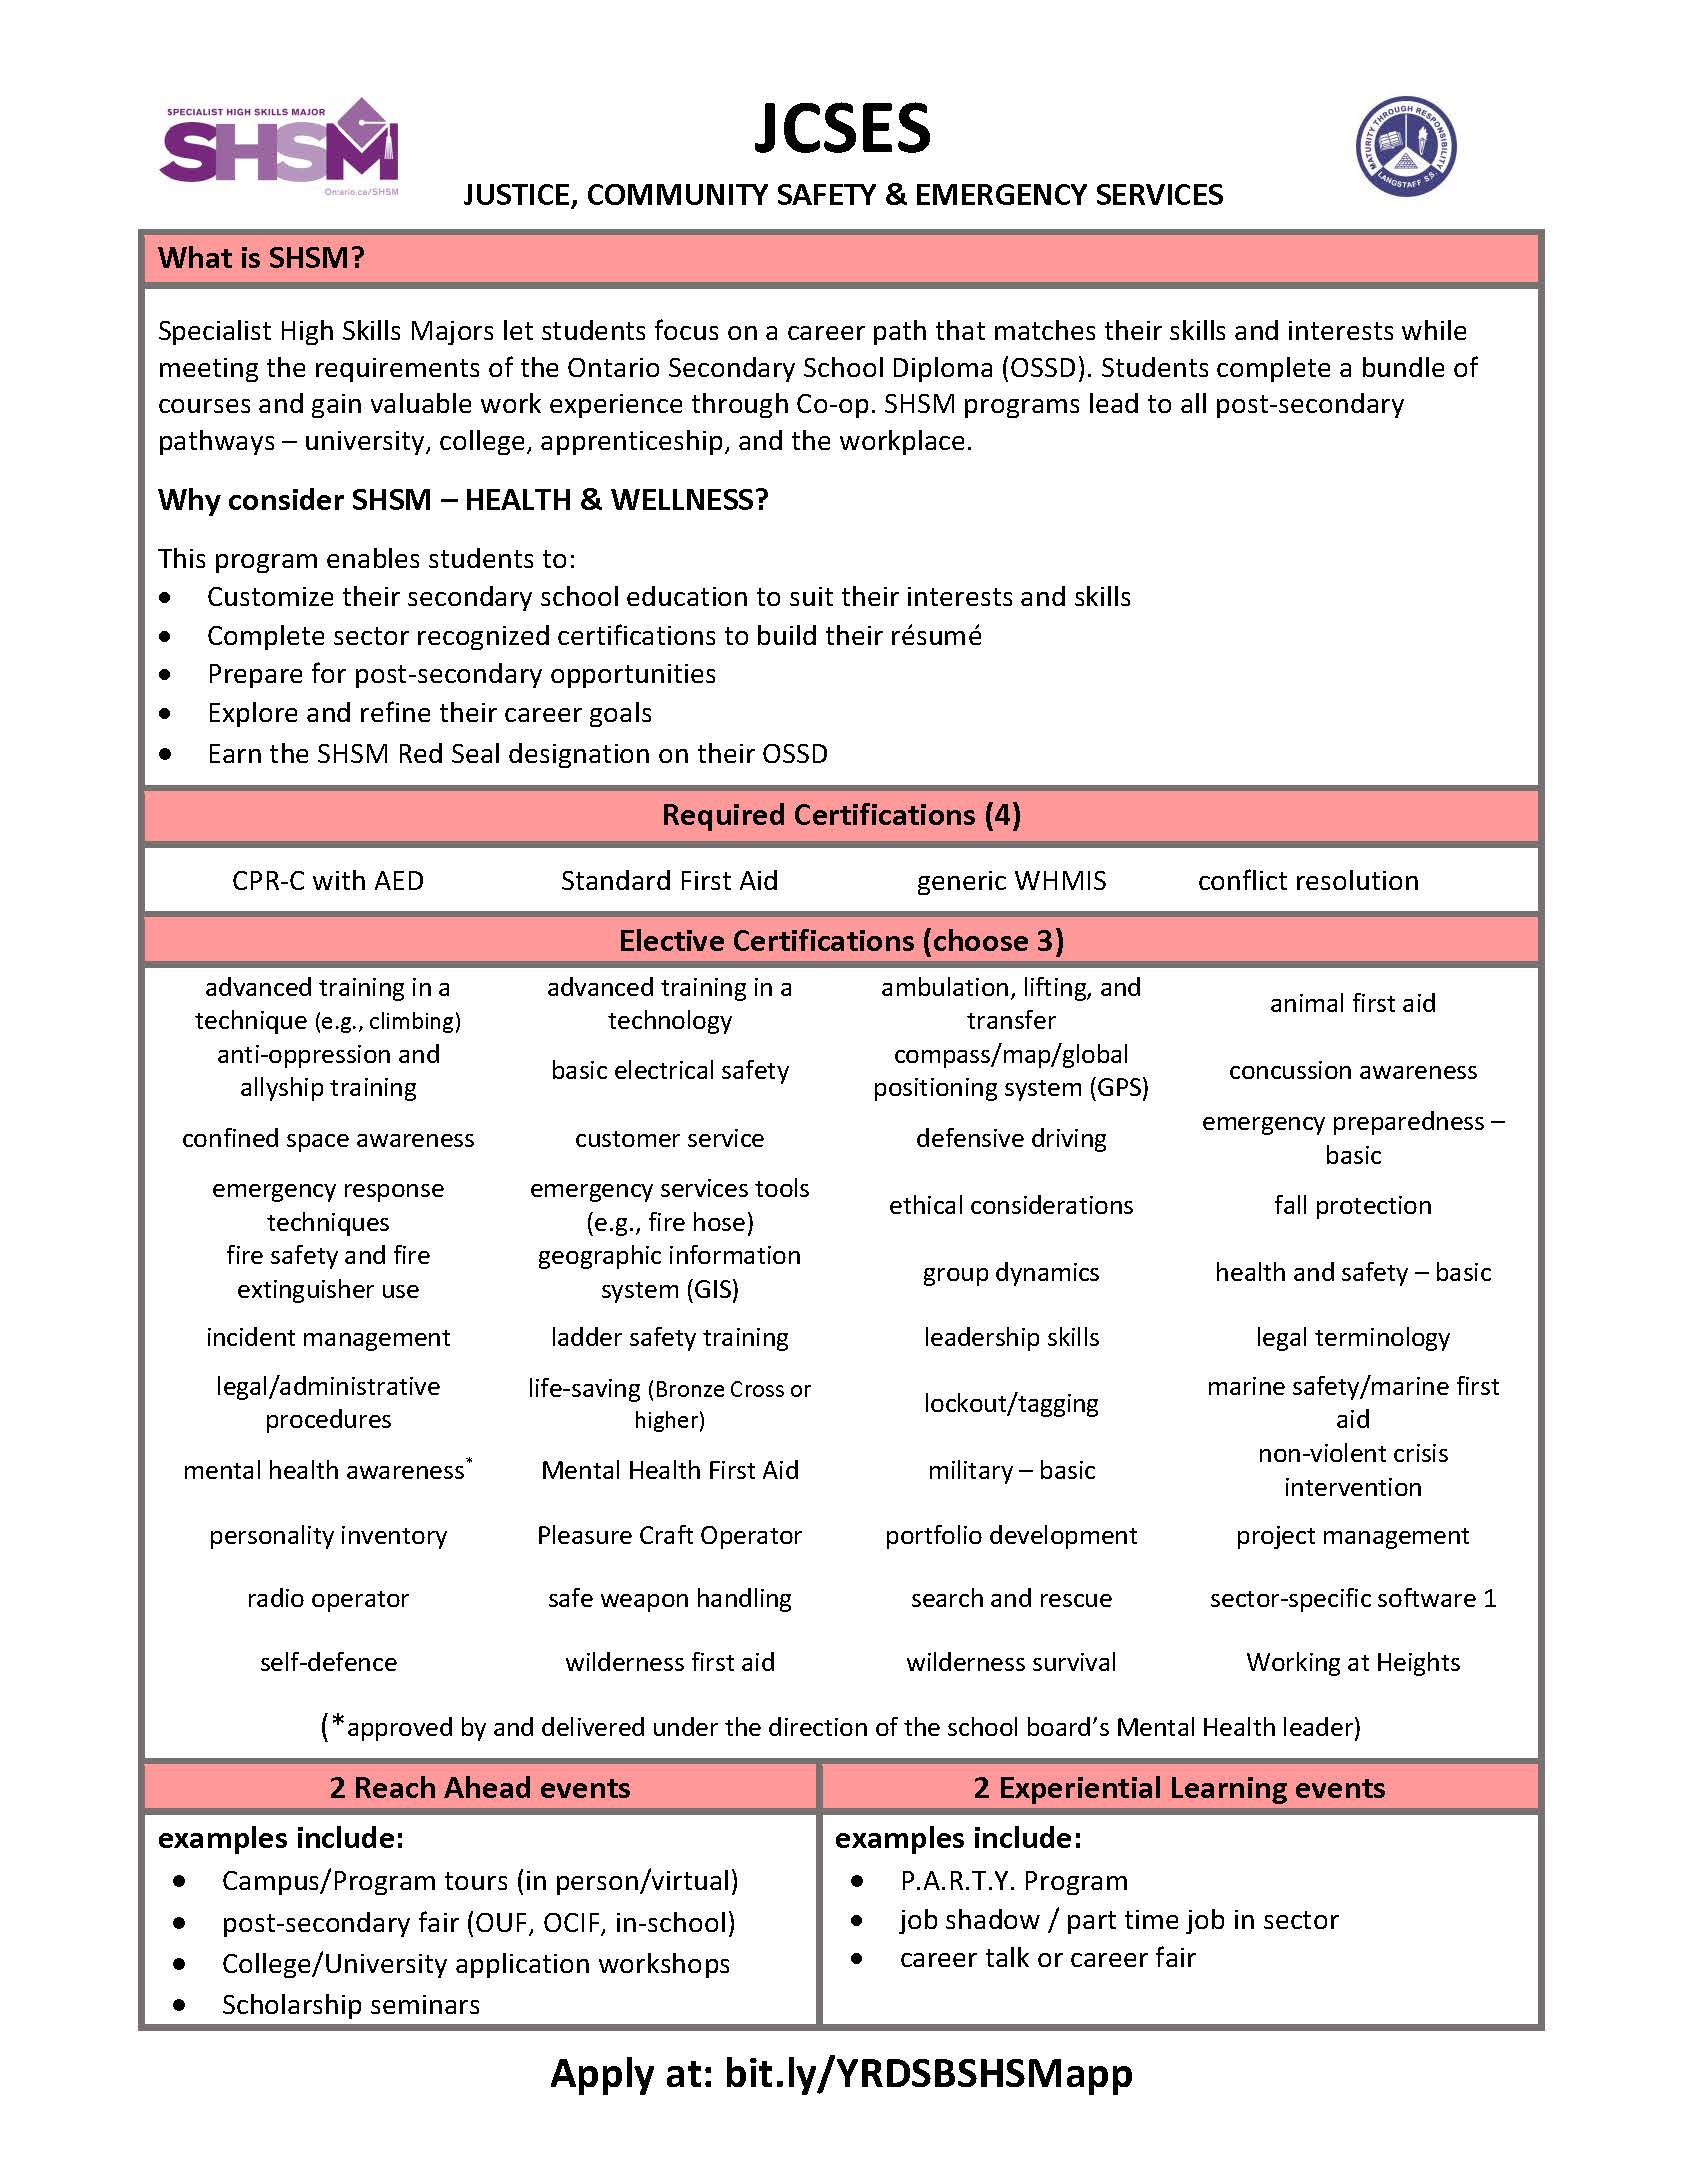 LSS JCSES Flyer 2020 (002)_Page_1.jpg